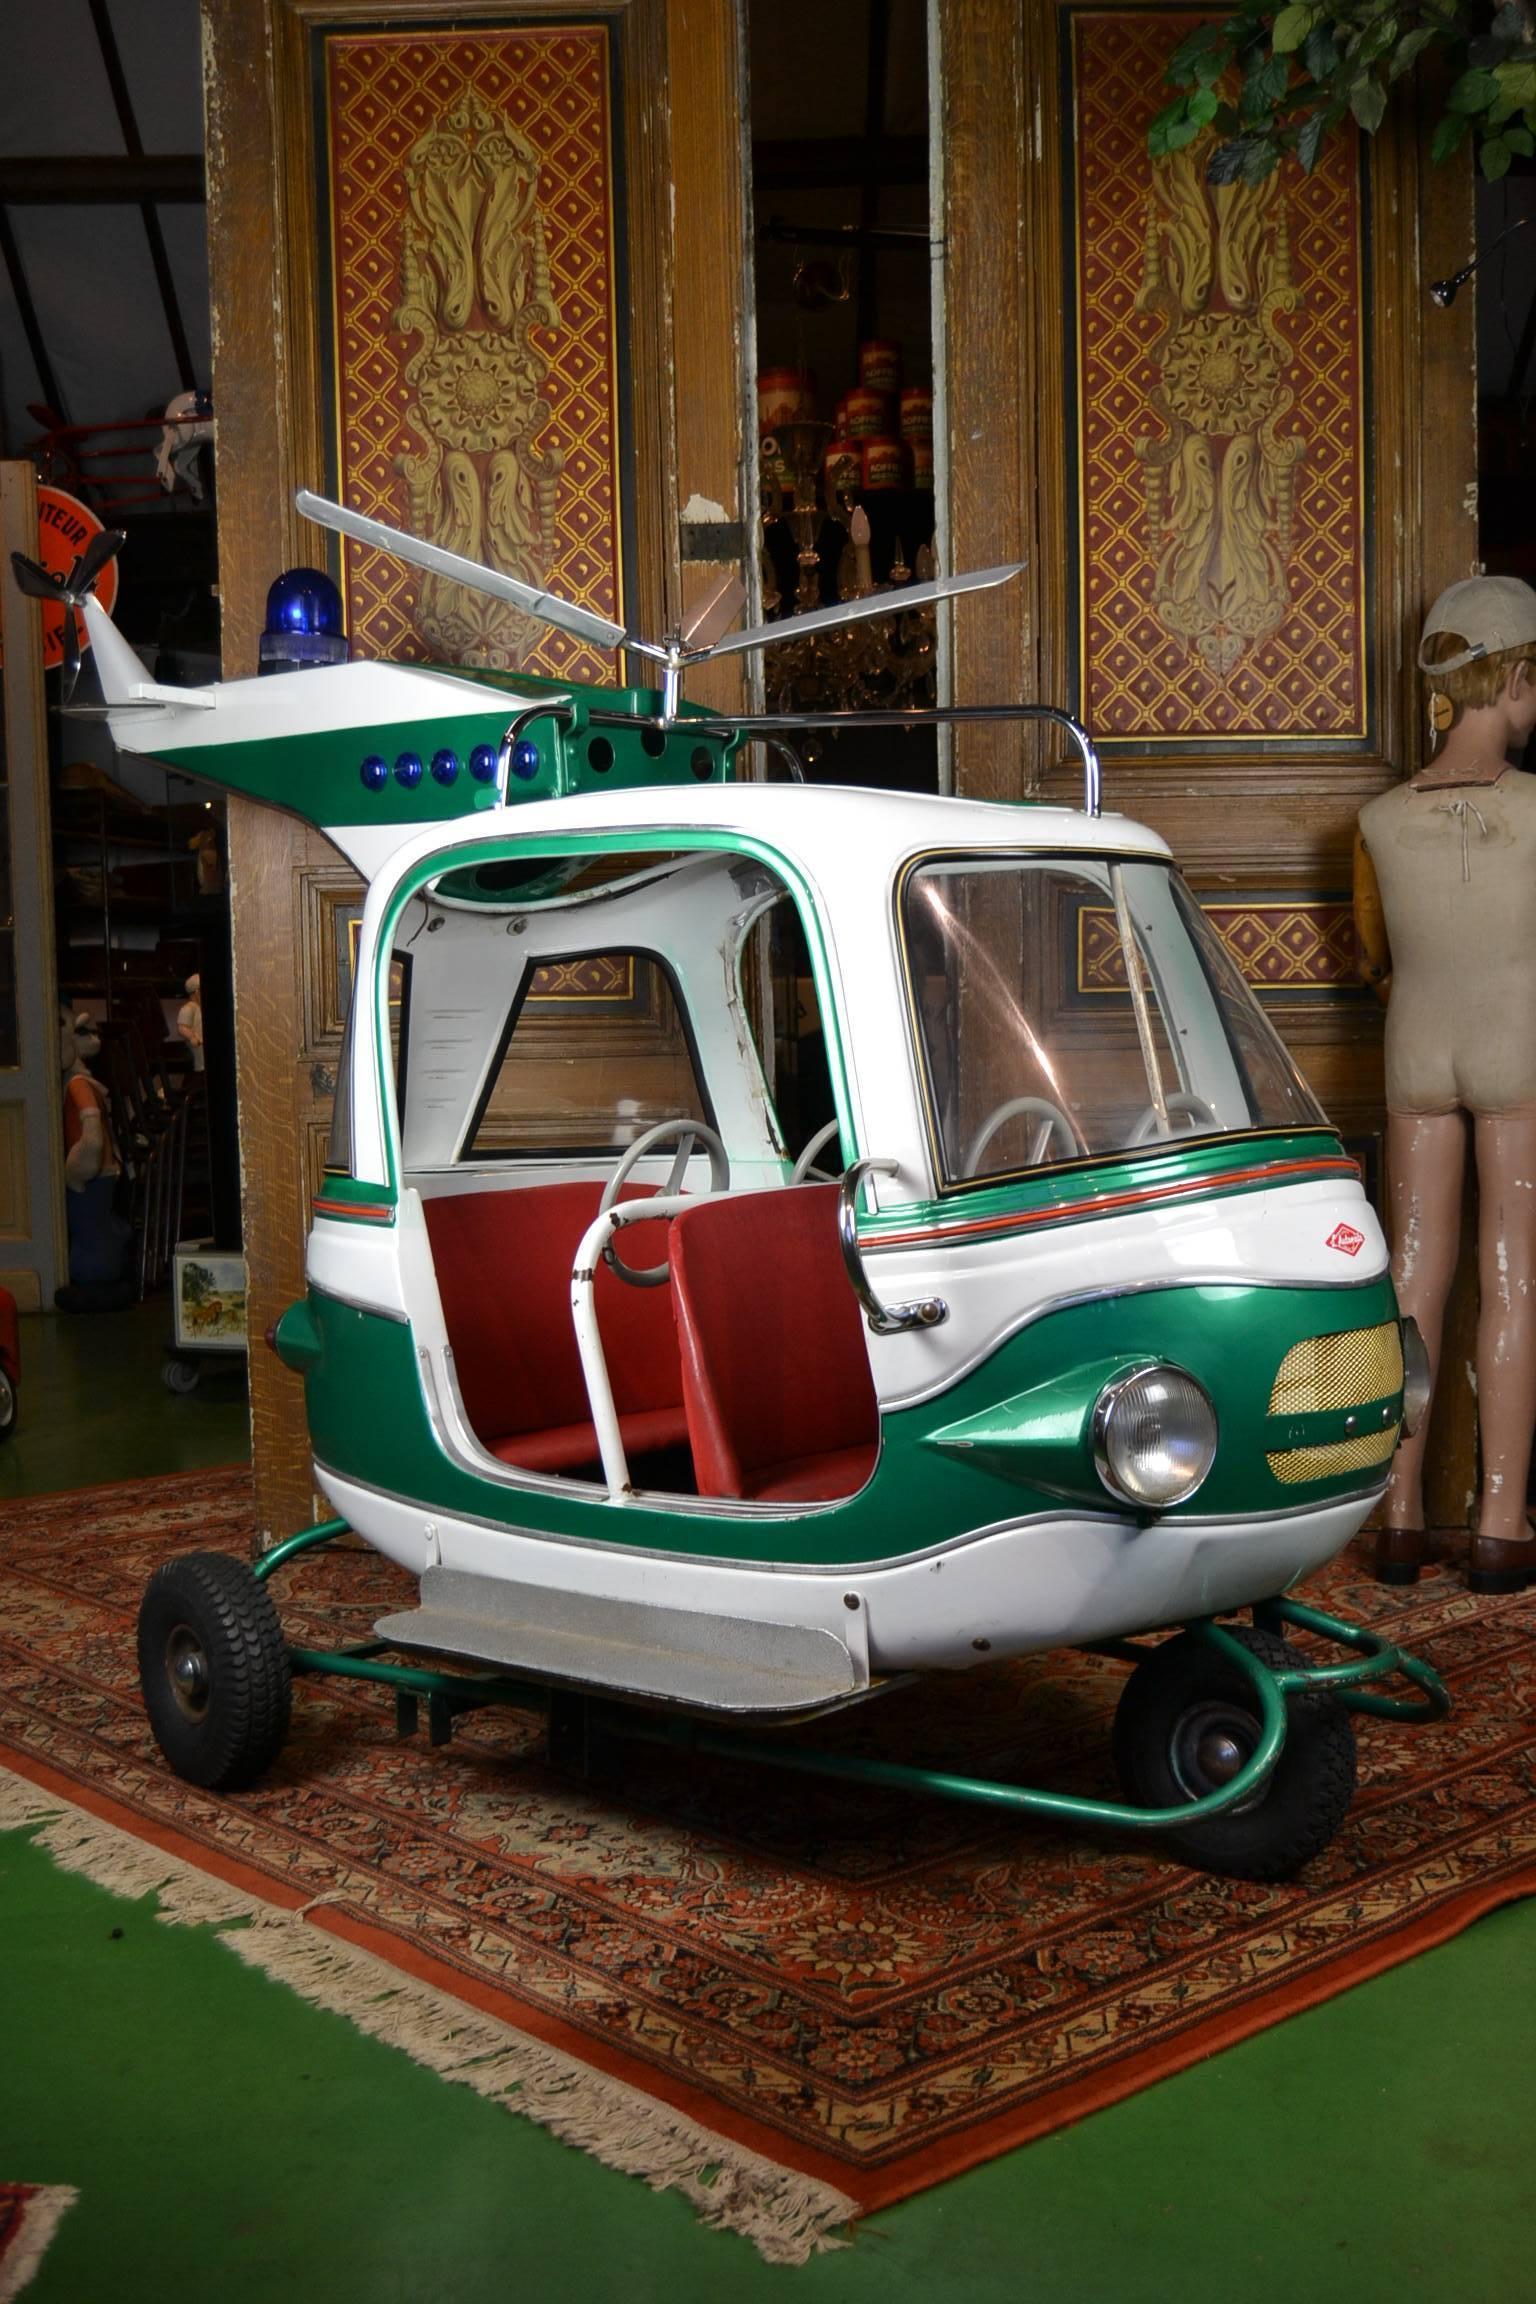 Exceptional piece of Carnival Art theme aviation - aeronautics. 
Big handmade metal police helicopter made by the famous Belgium Fairground Atelier L' Autopede in the Seventies.
This spectacular child's Heli - aircraft - chopper - Whirlybird in